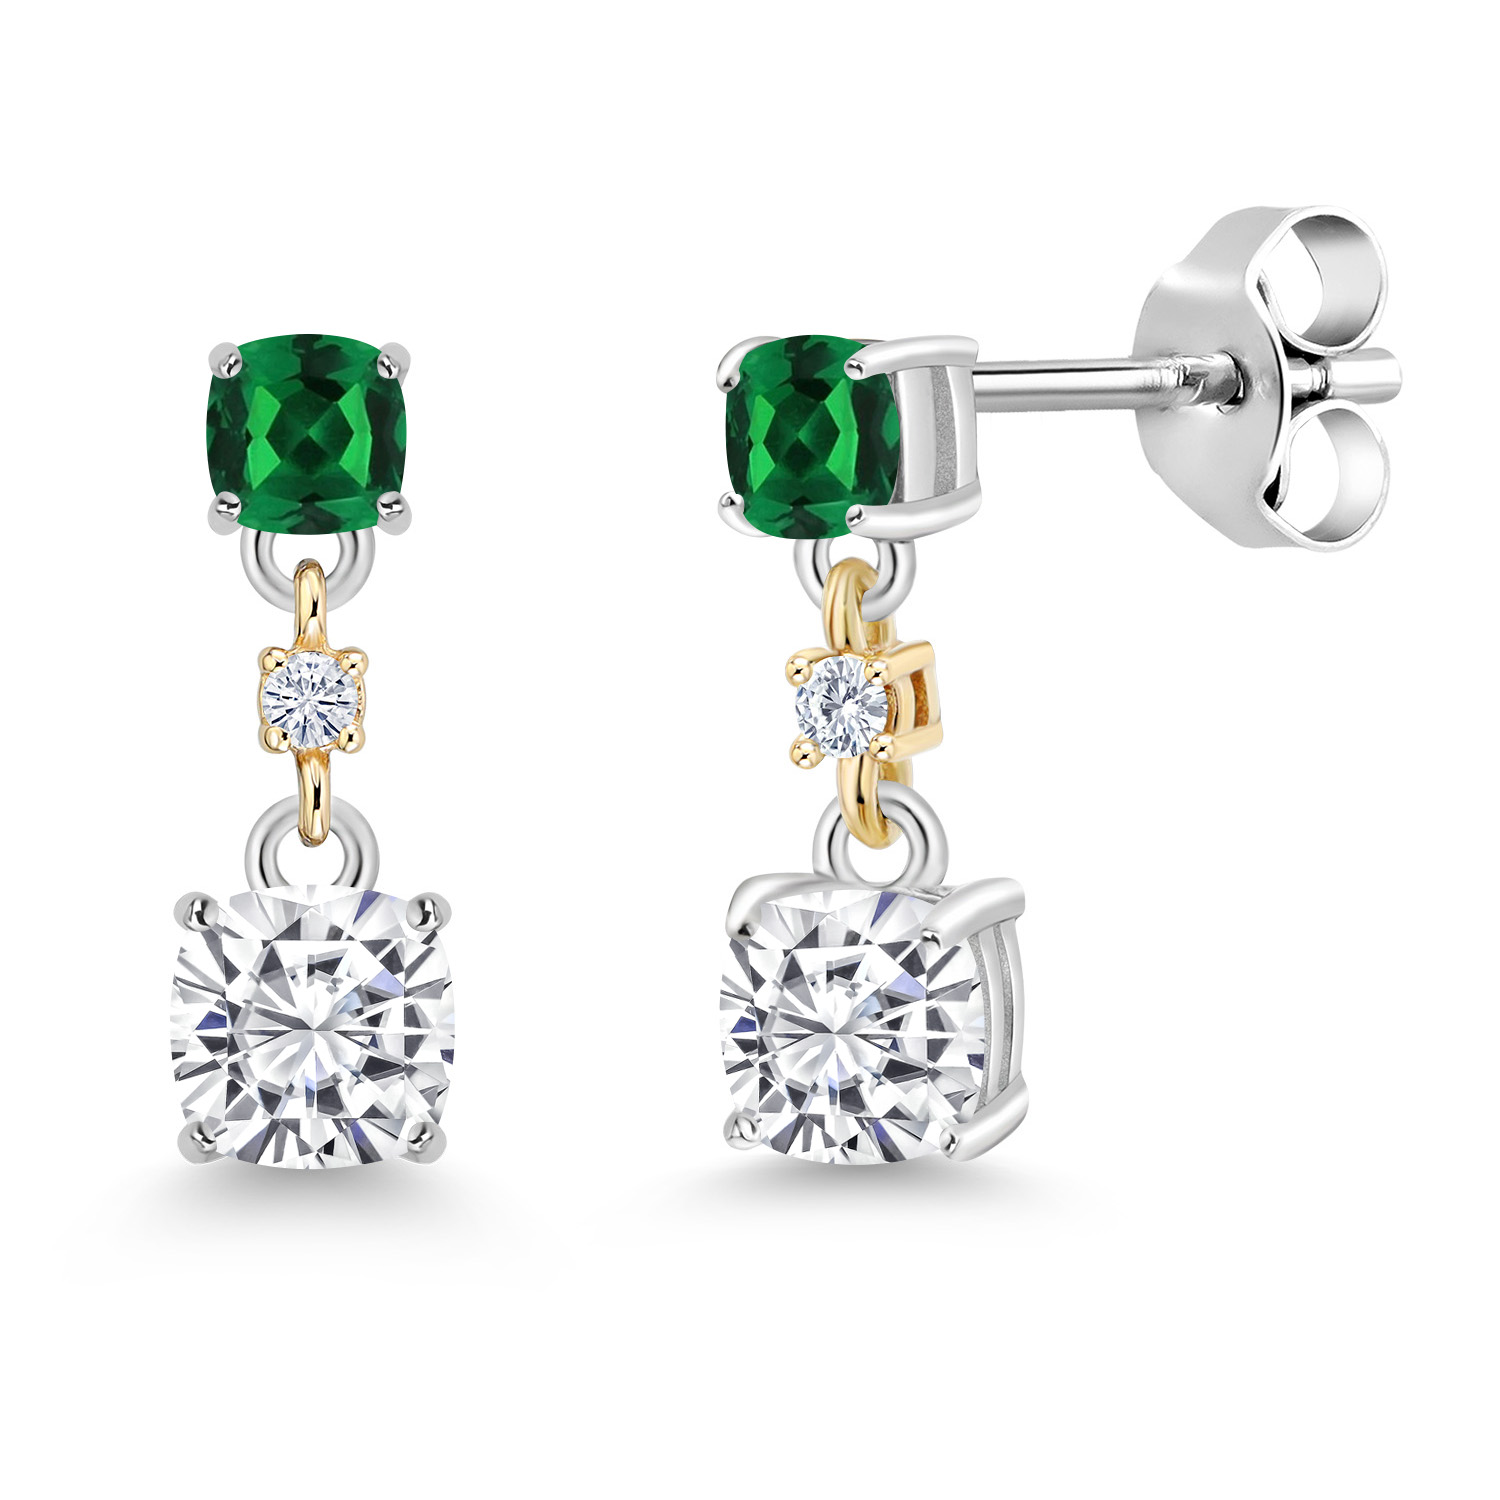 Gem Stone King 925 Silver and 10K Yellow Gold Green Nano Emerald Earrings Set with Moissanite (1.00 Cttw)